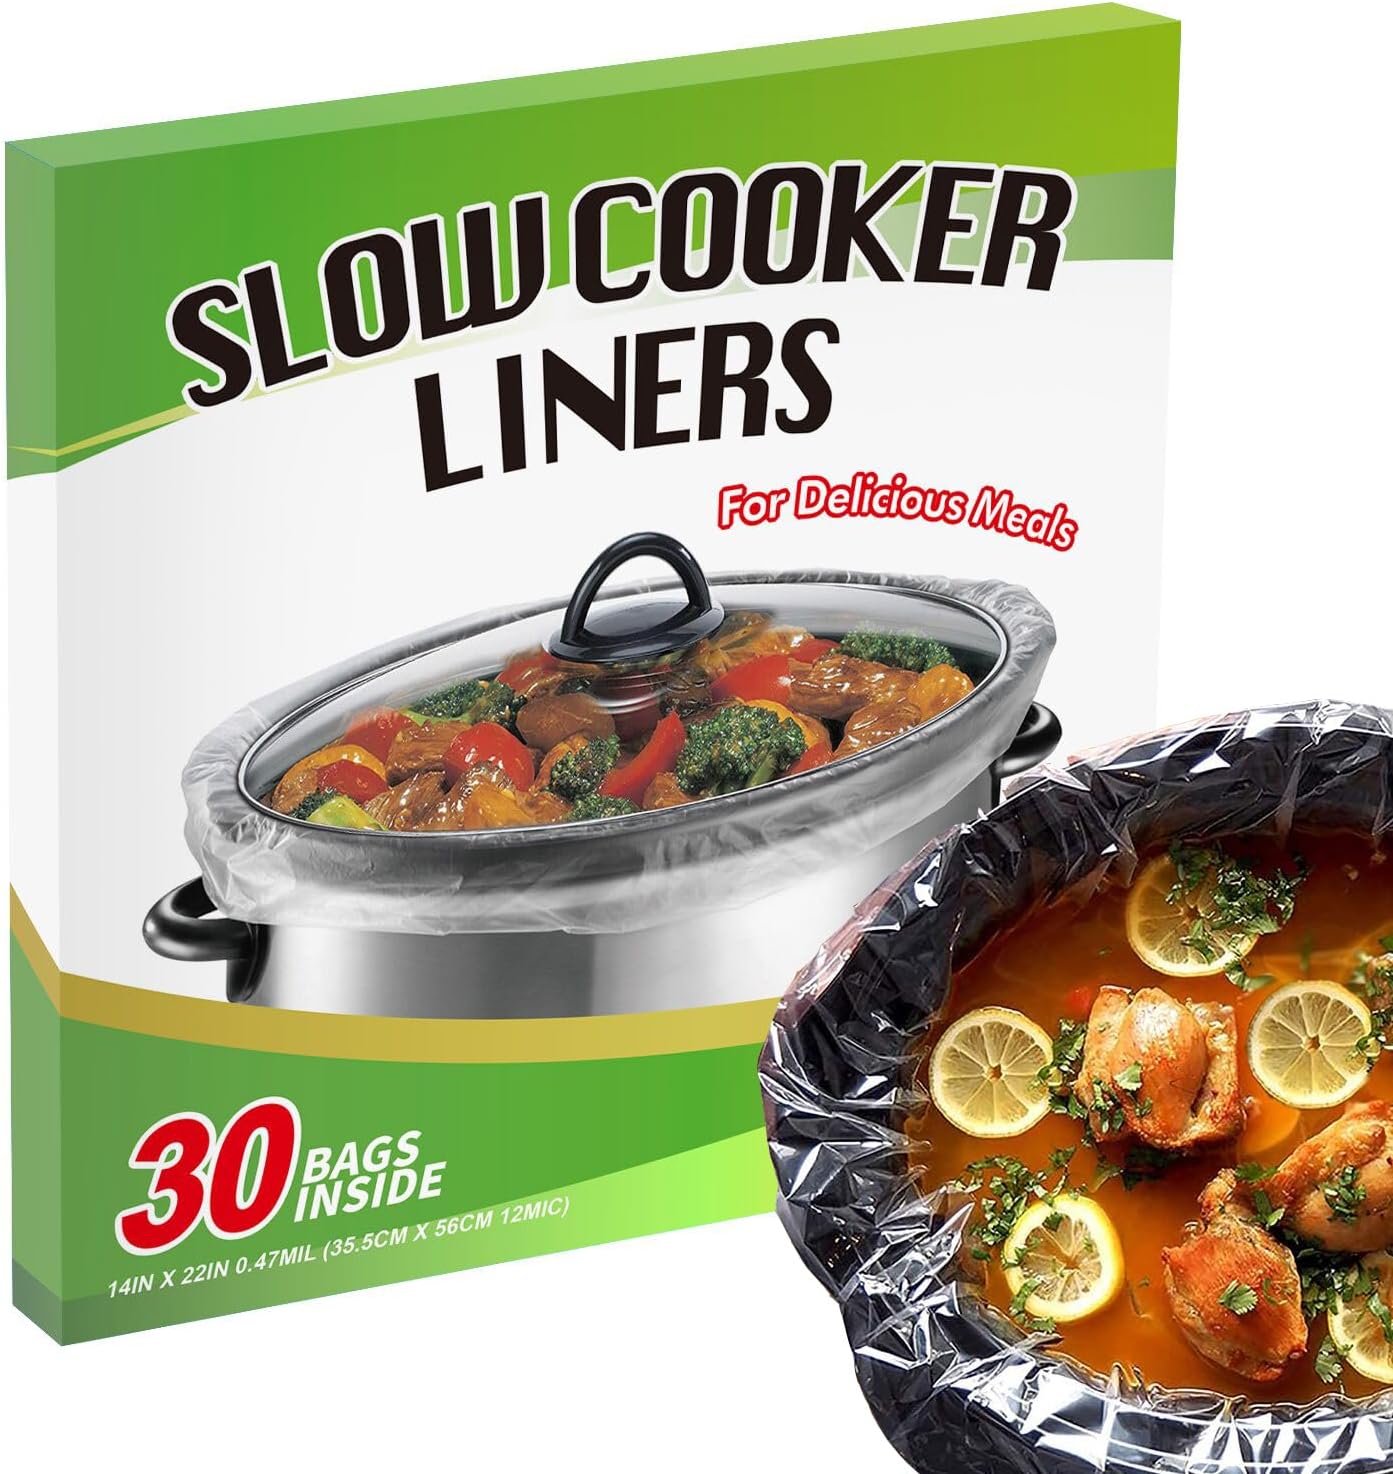 Slow Cooker Liners (40 Liners), 13 × 21 Pot Liners Fit 3-8 Quarts, Disposable Cooking Bags Suitable for Oval  Round Pot, BPA Free (13 × 21)